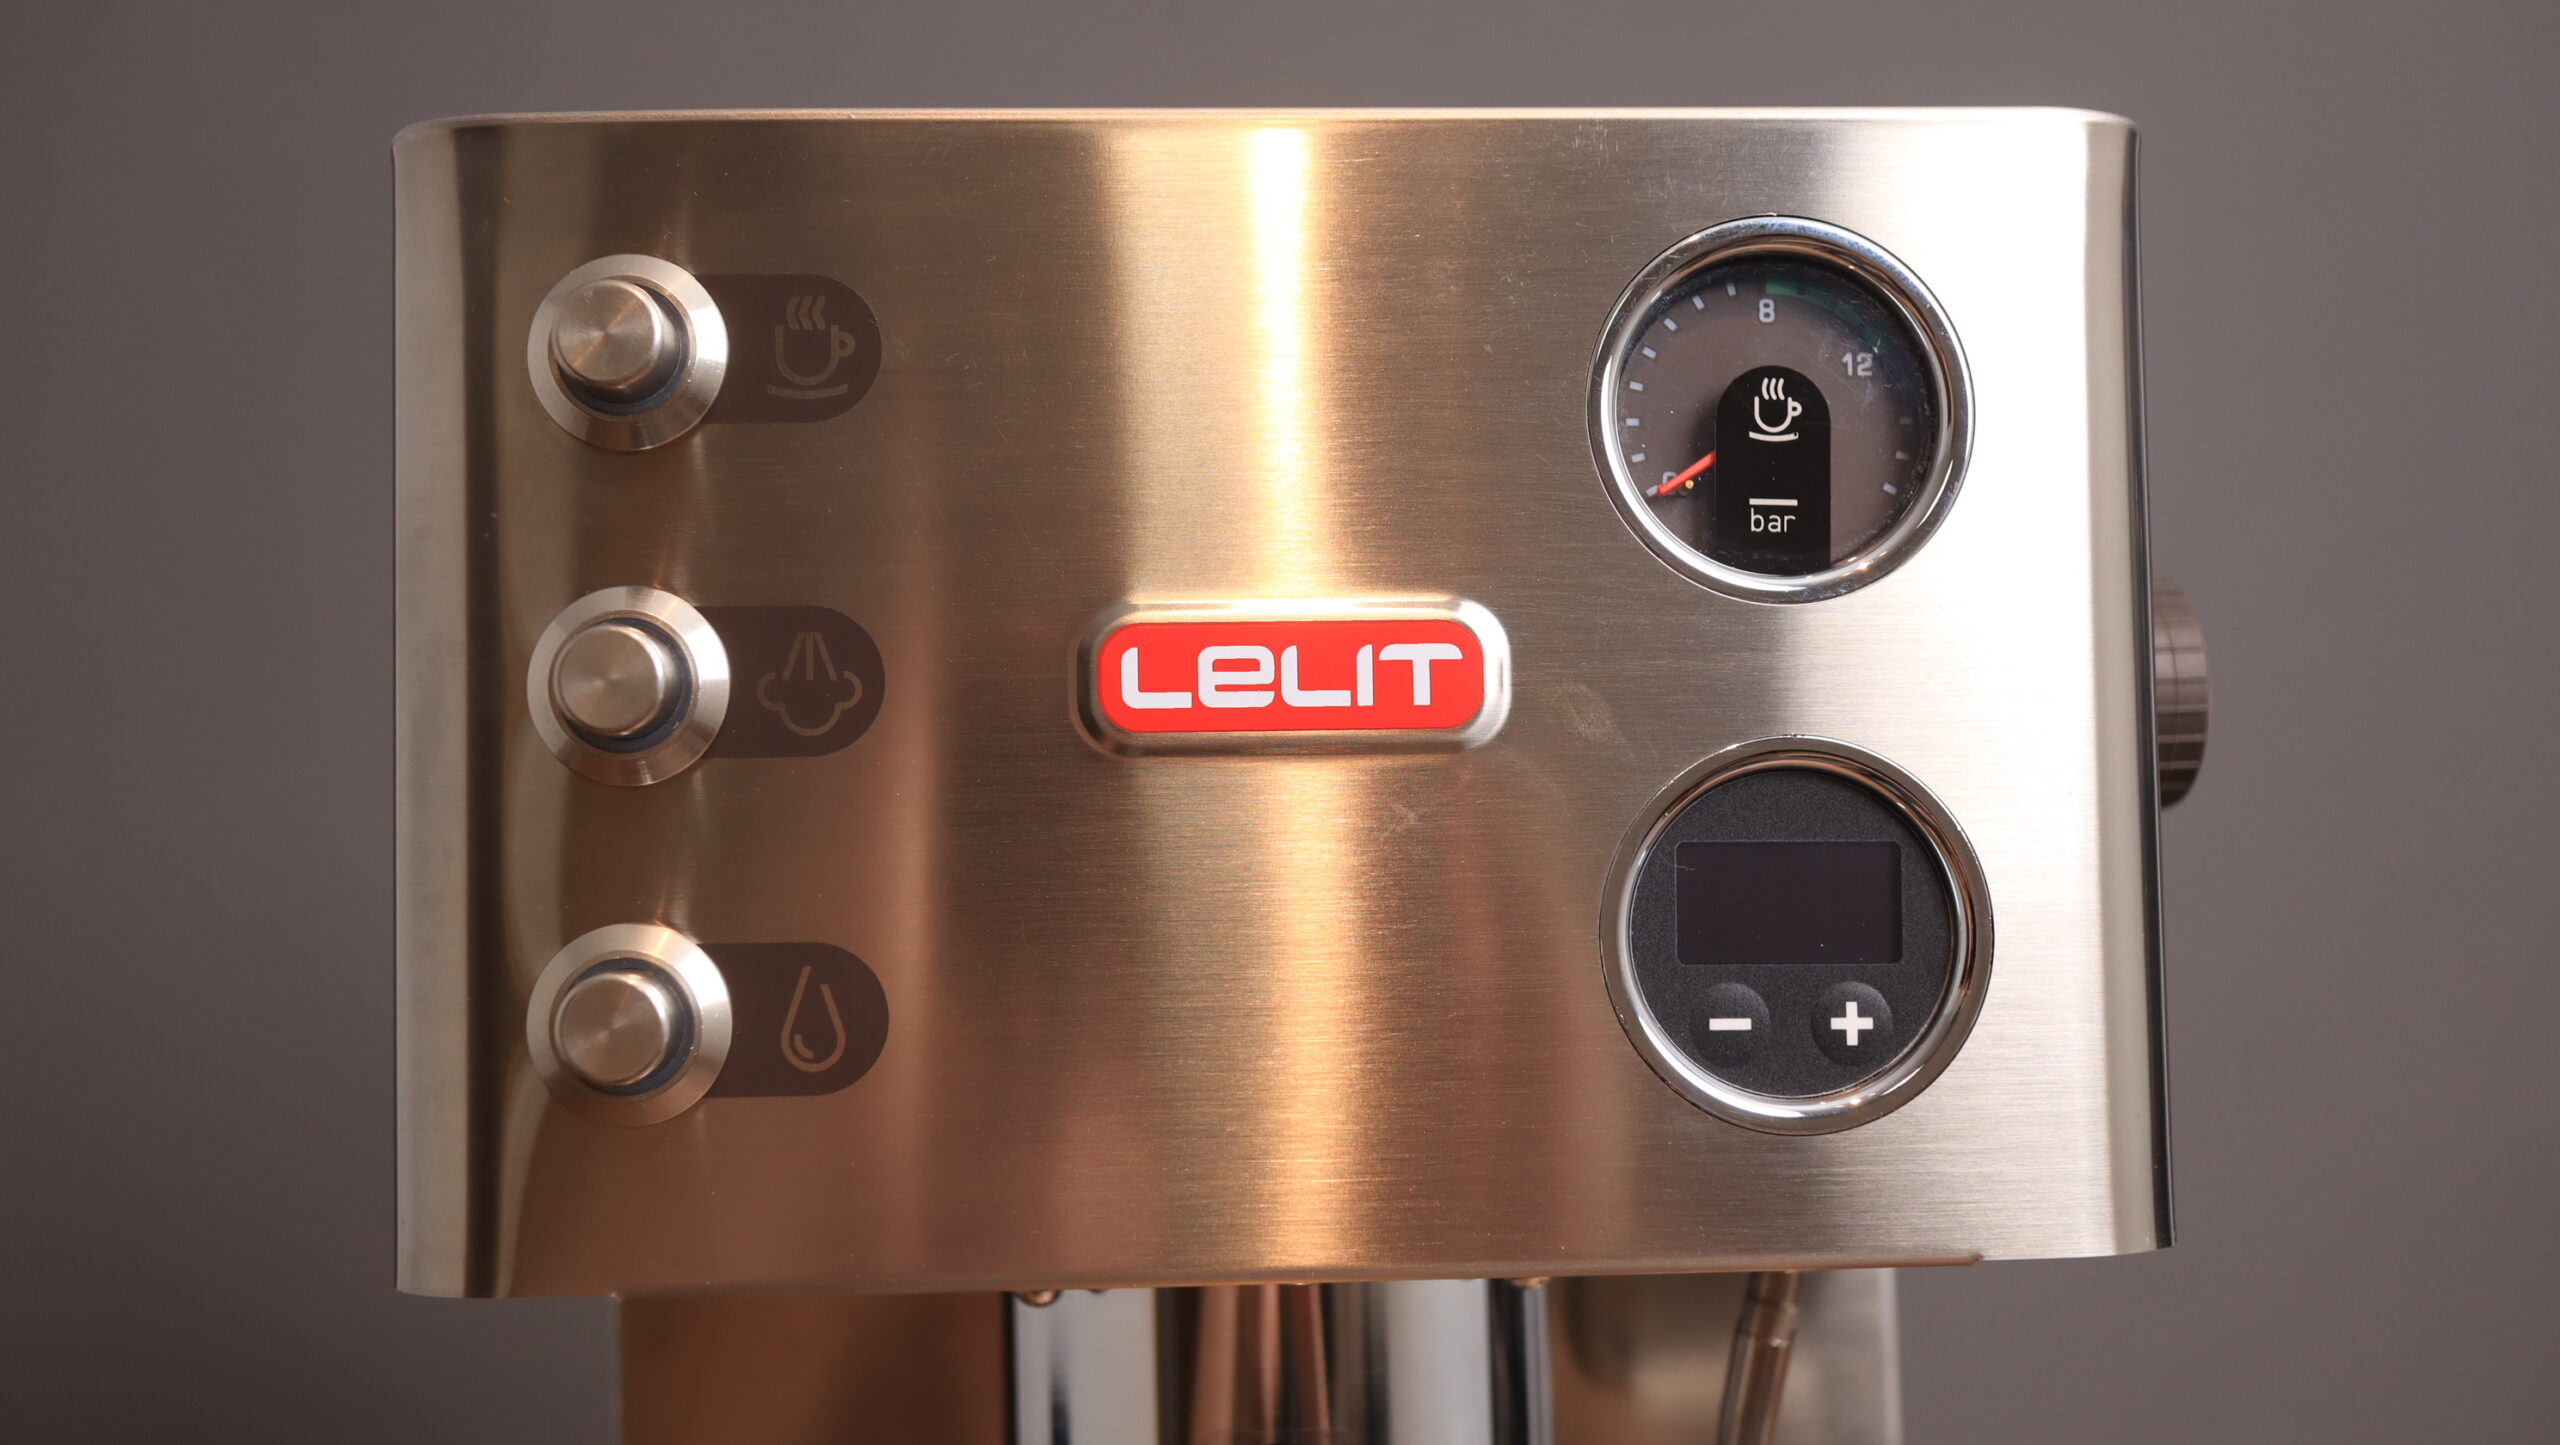 Lelit PL81T Grace, front display with manometer, PID, and 3 buttons